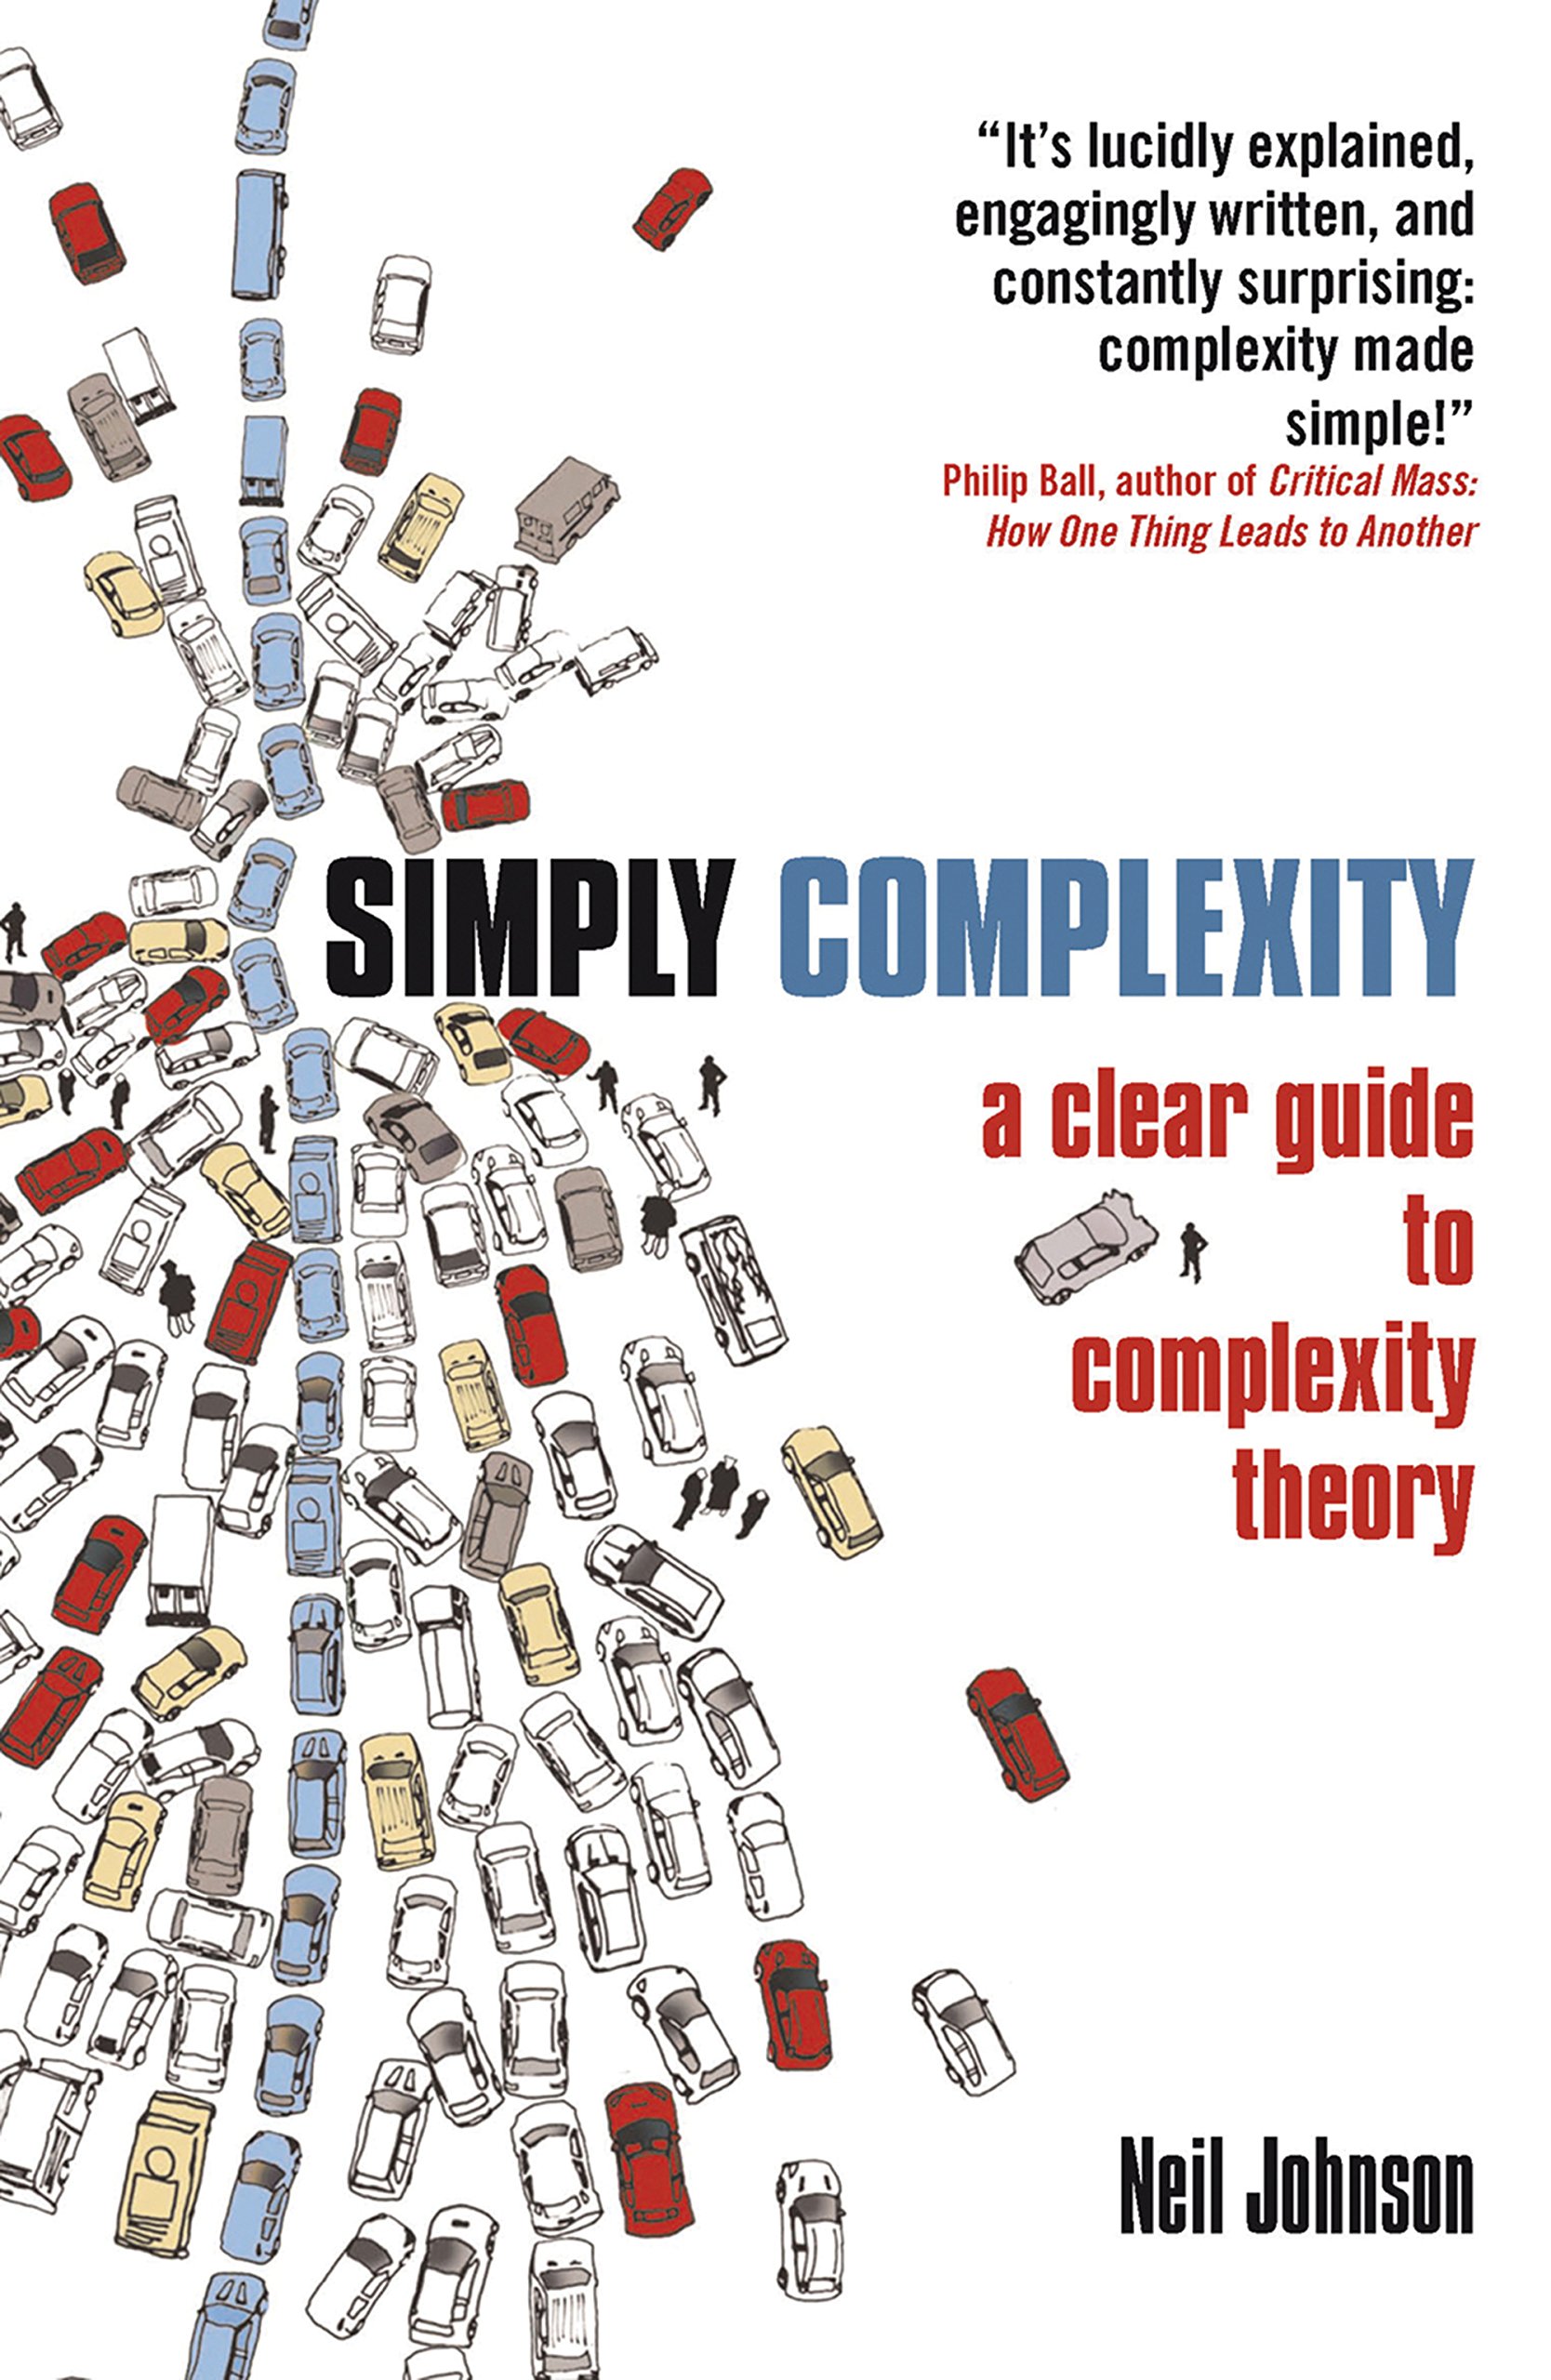 The book cover for Simply Complexity.